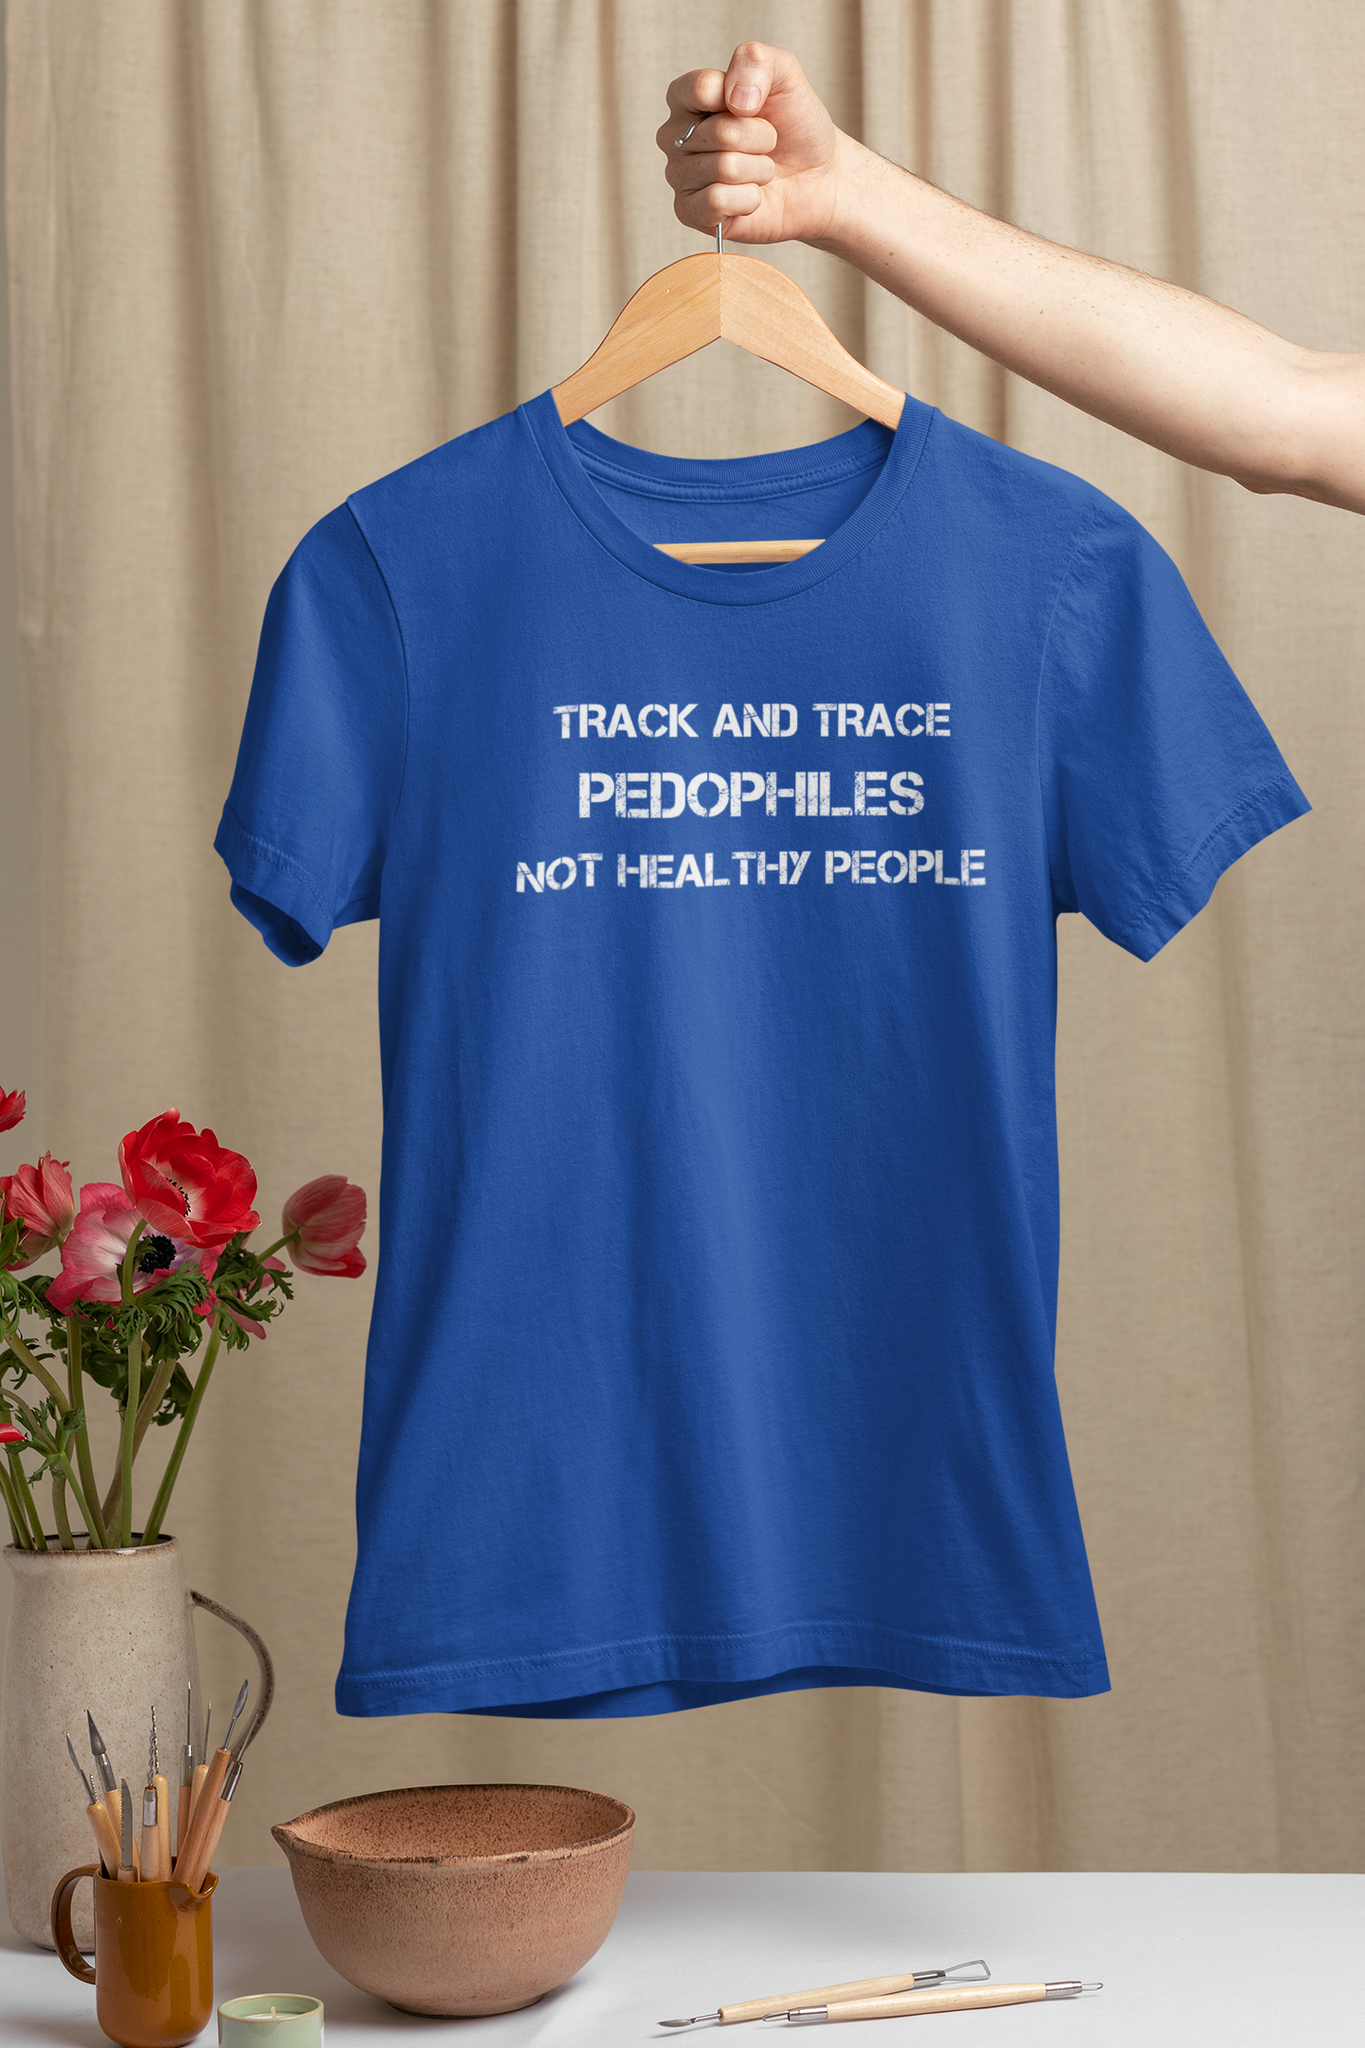 Track And Trace Pedophiles-Not Healthy People